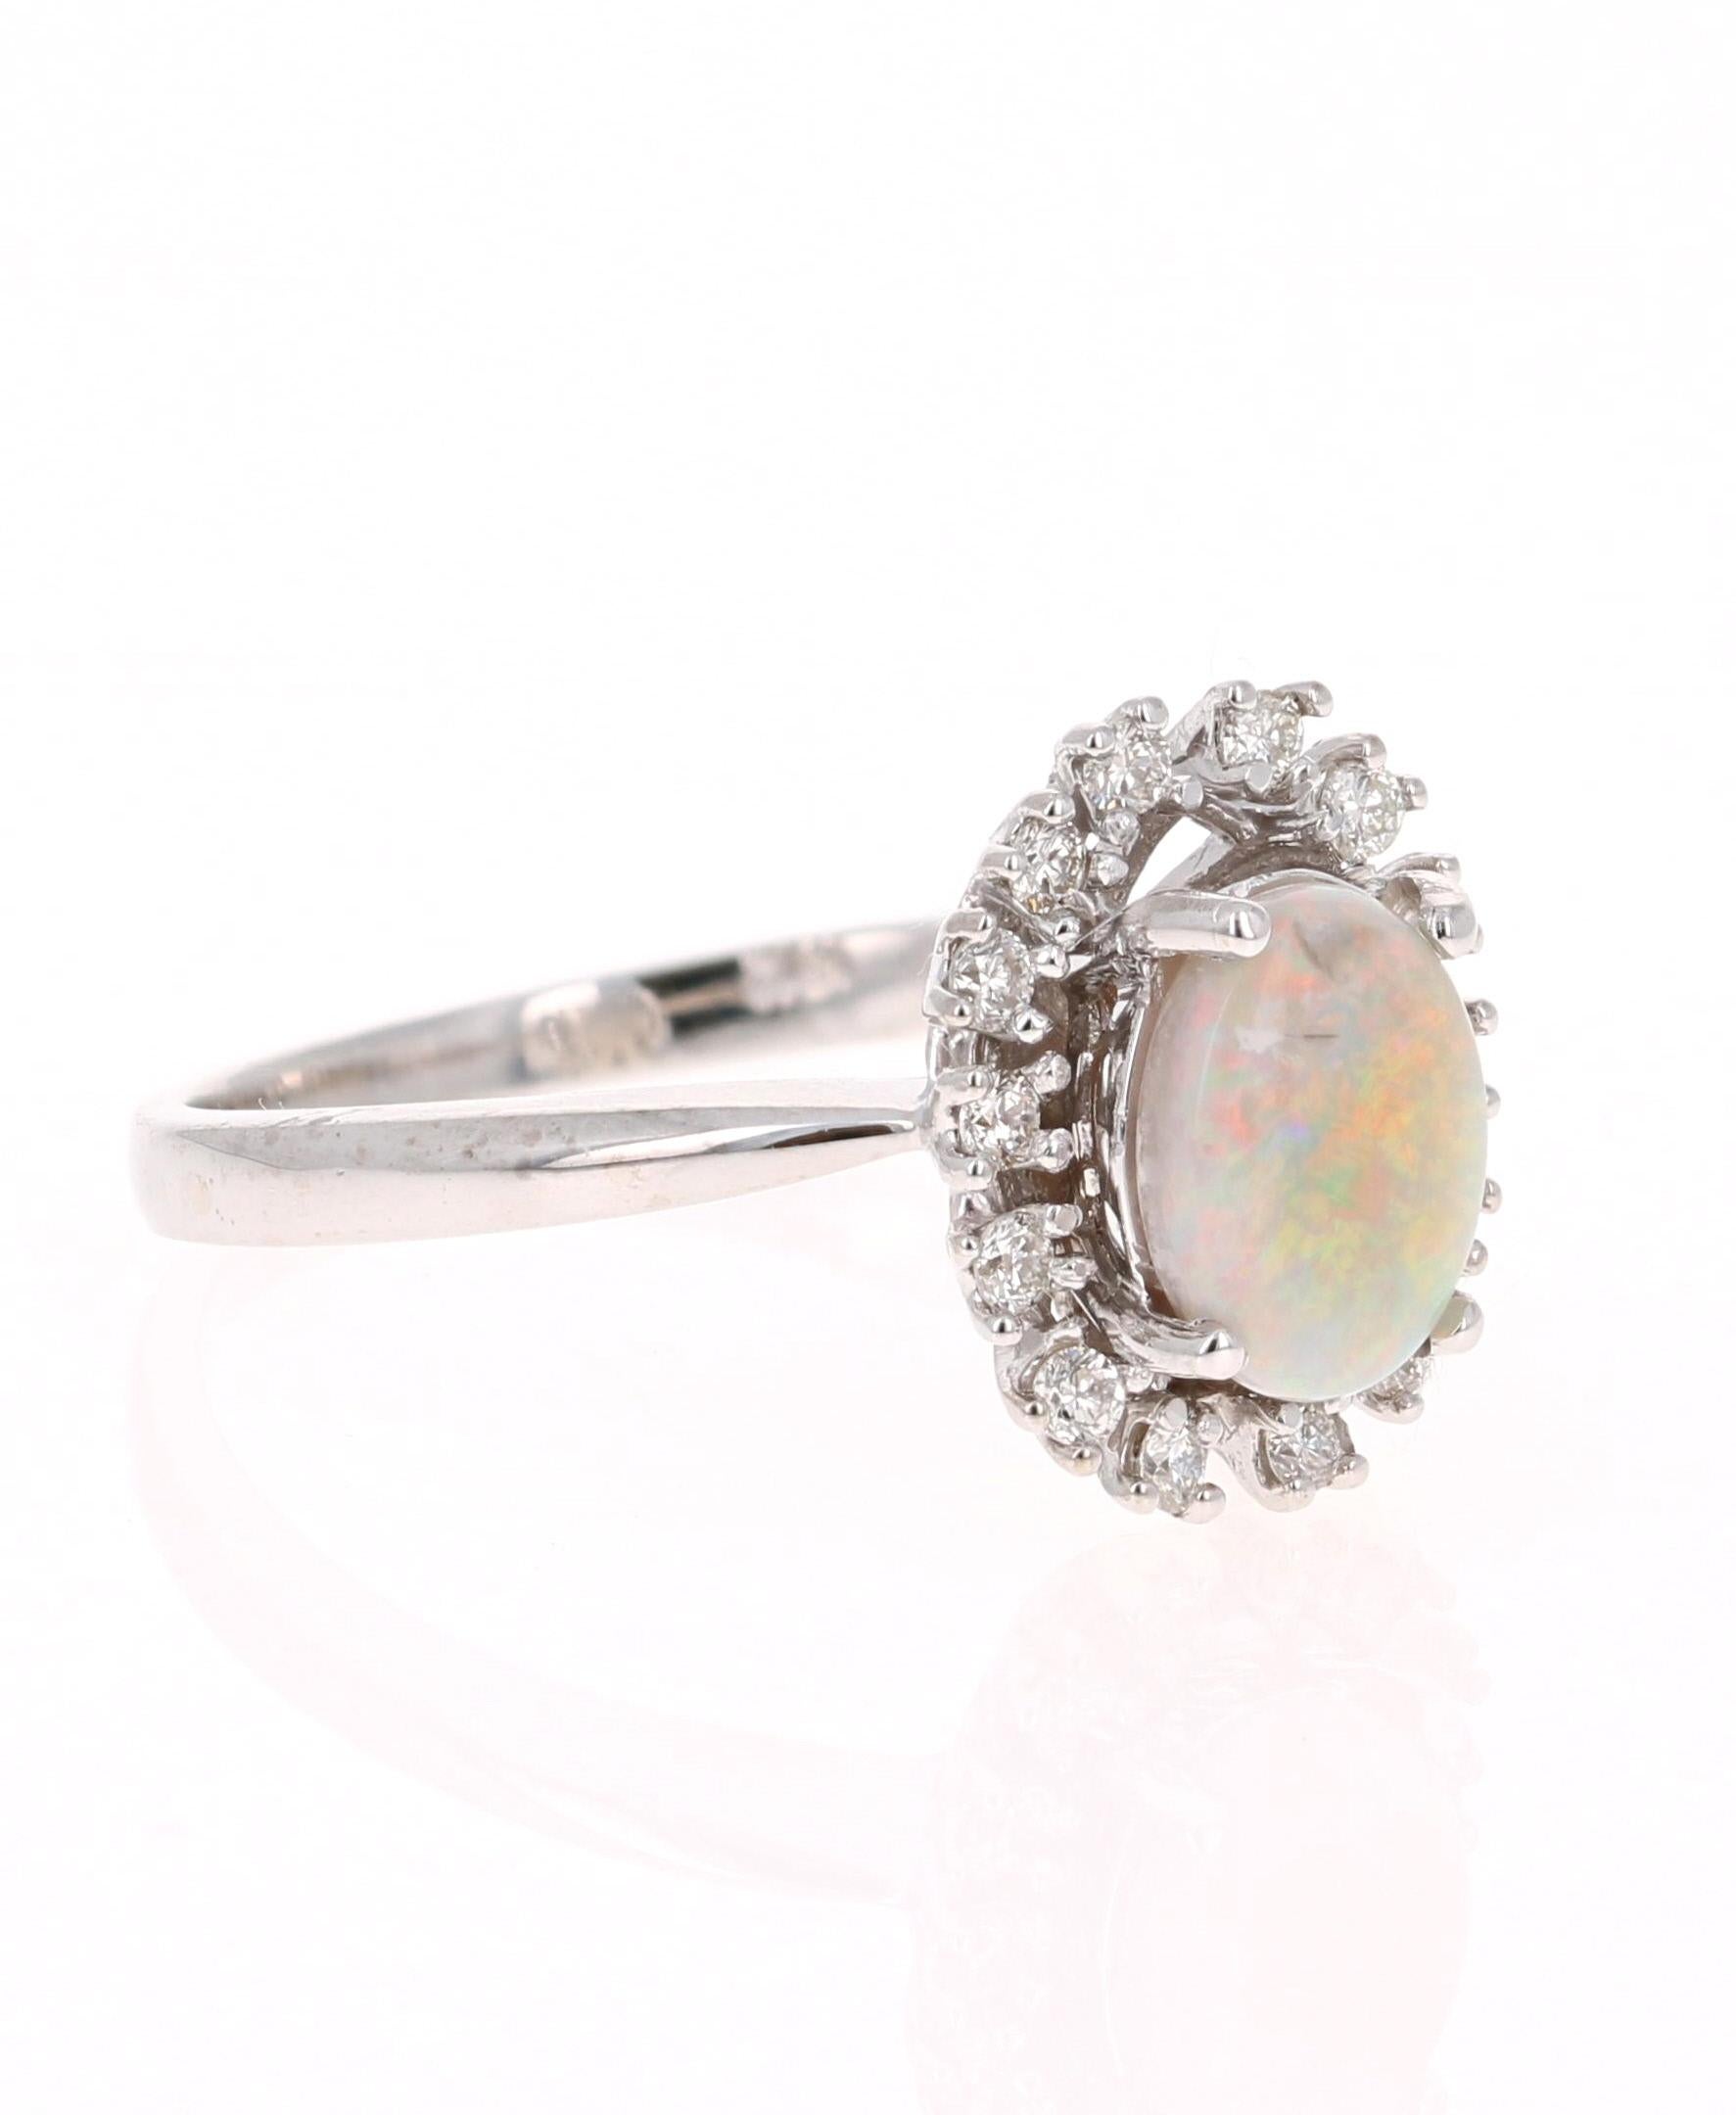 This ring has a cute and simple 0.85 Carat Opal and has 14 Round Cut Diamonds that weigh 0.23 Carats. (Clarity: VS, Color: H) The total carat weight of the ring is 1.08 Carats. 

The Opal displays beautiful flashes of yellow and orange and has its